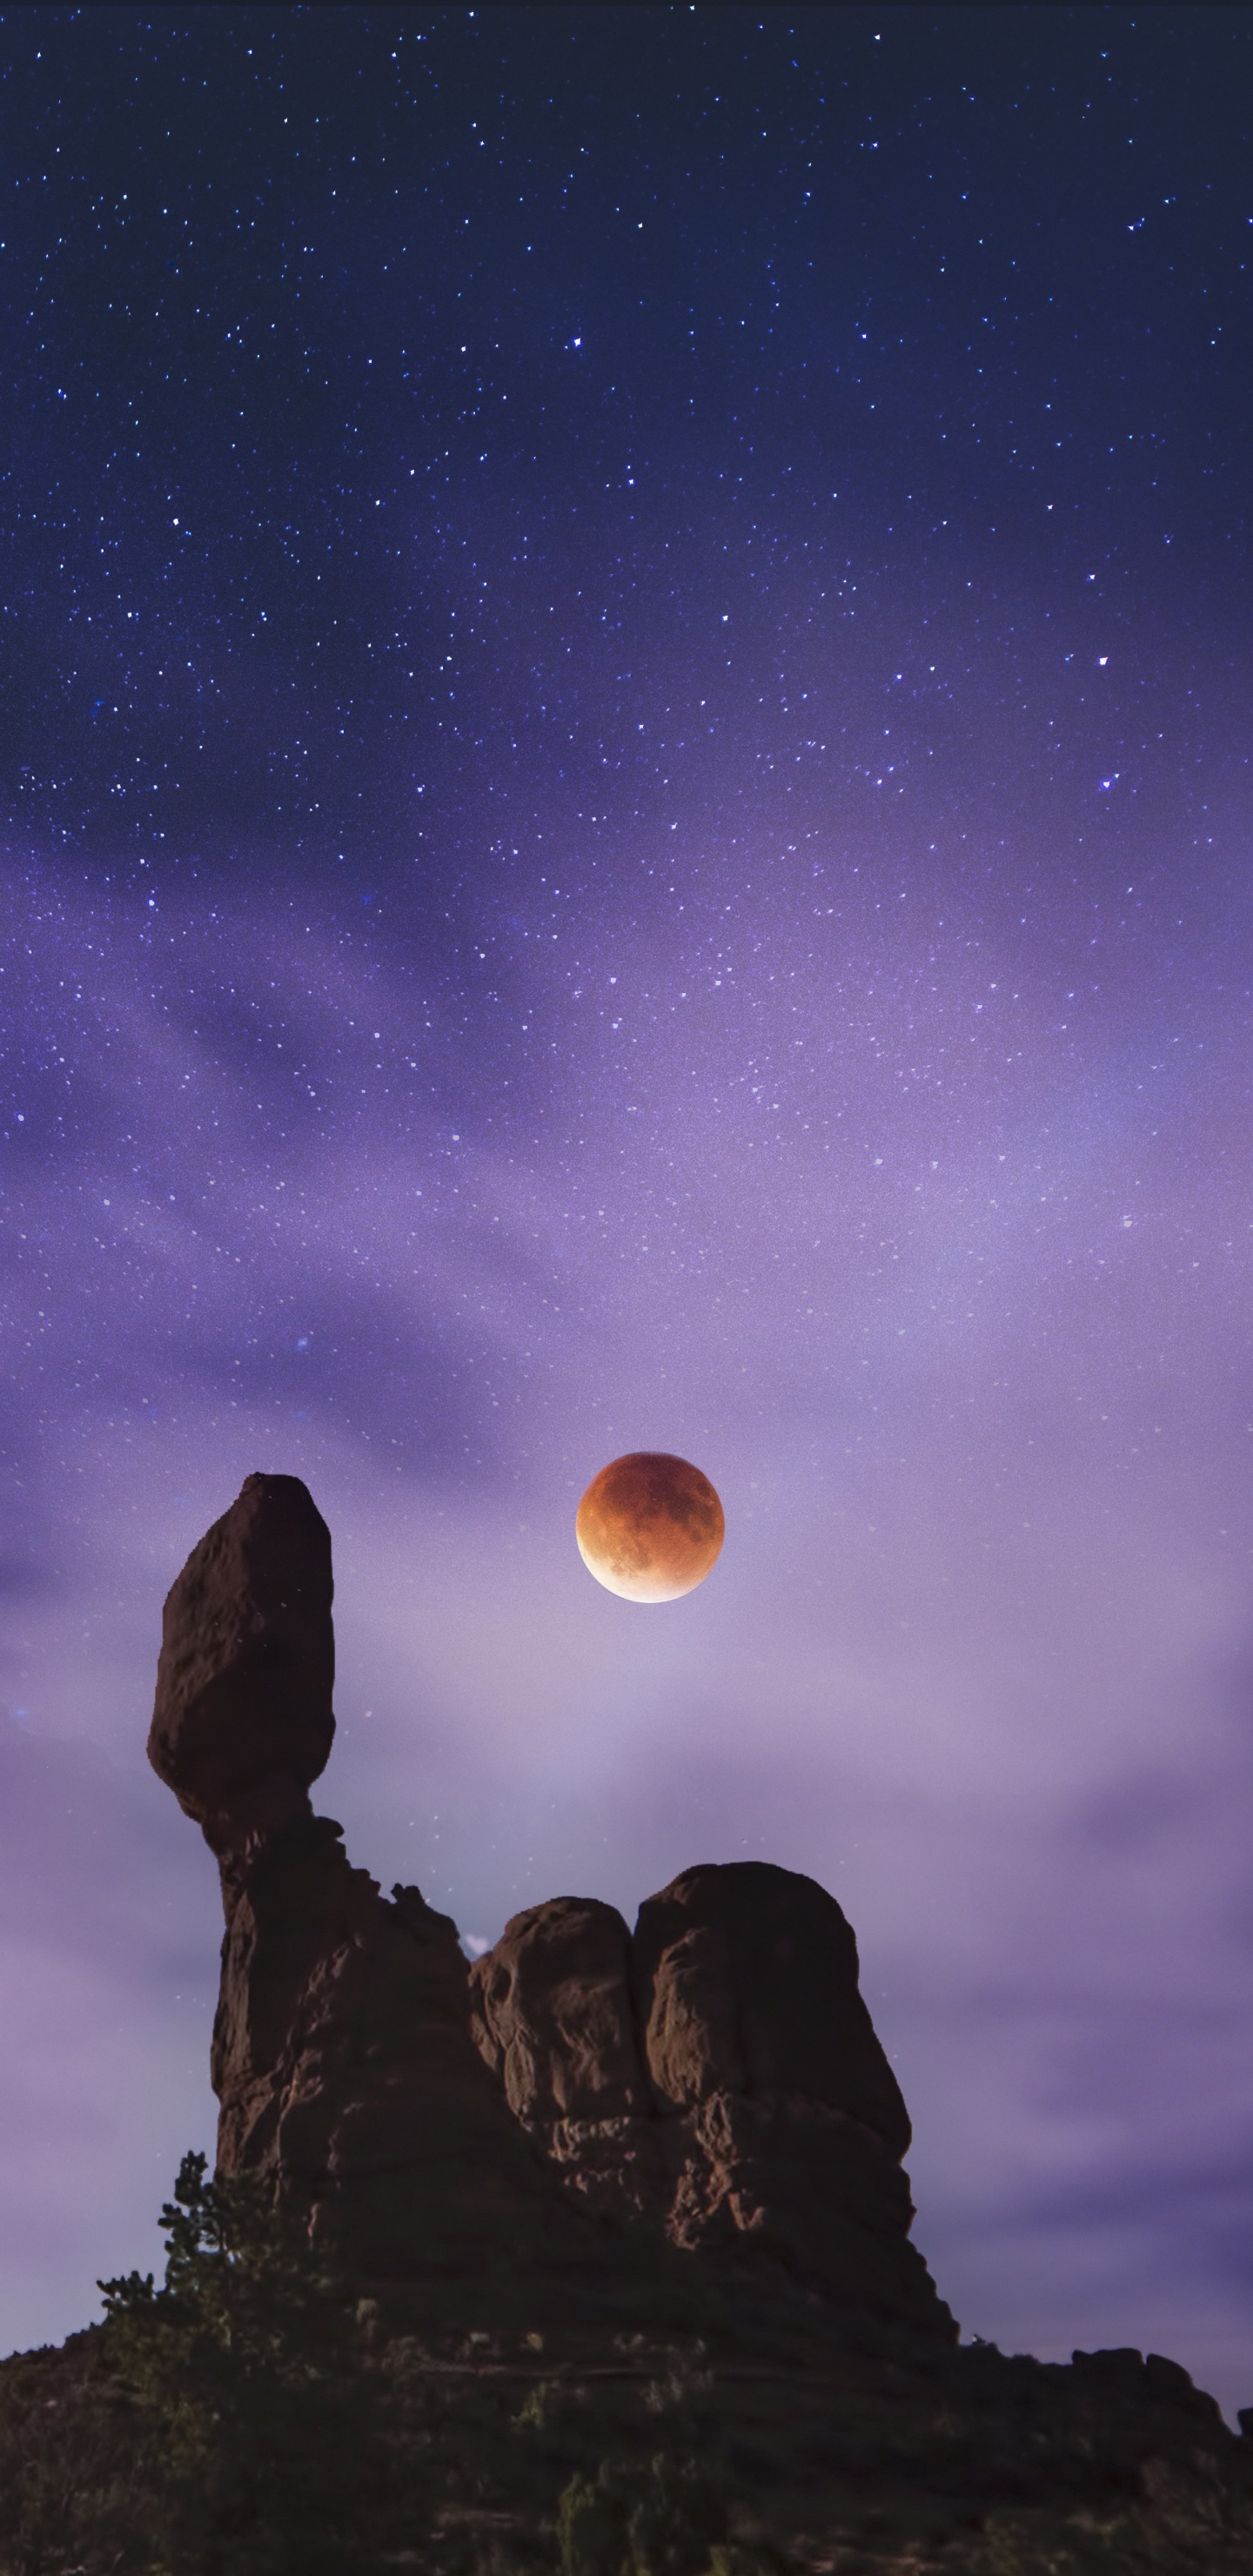 Silhouette of Man and Woman Sitting on Rock Under Starry Night. Wallpaper in 1440x2960 Resolution